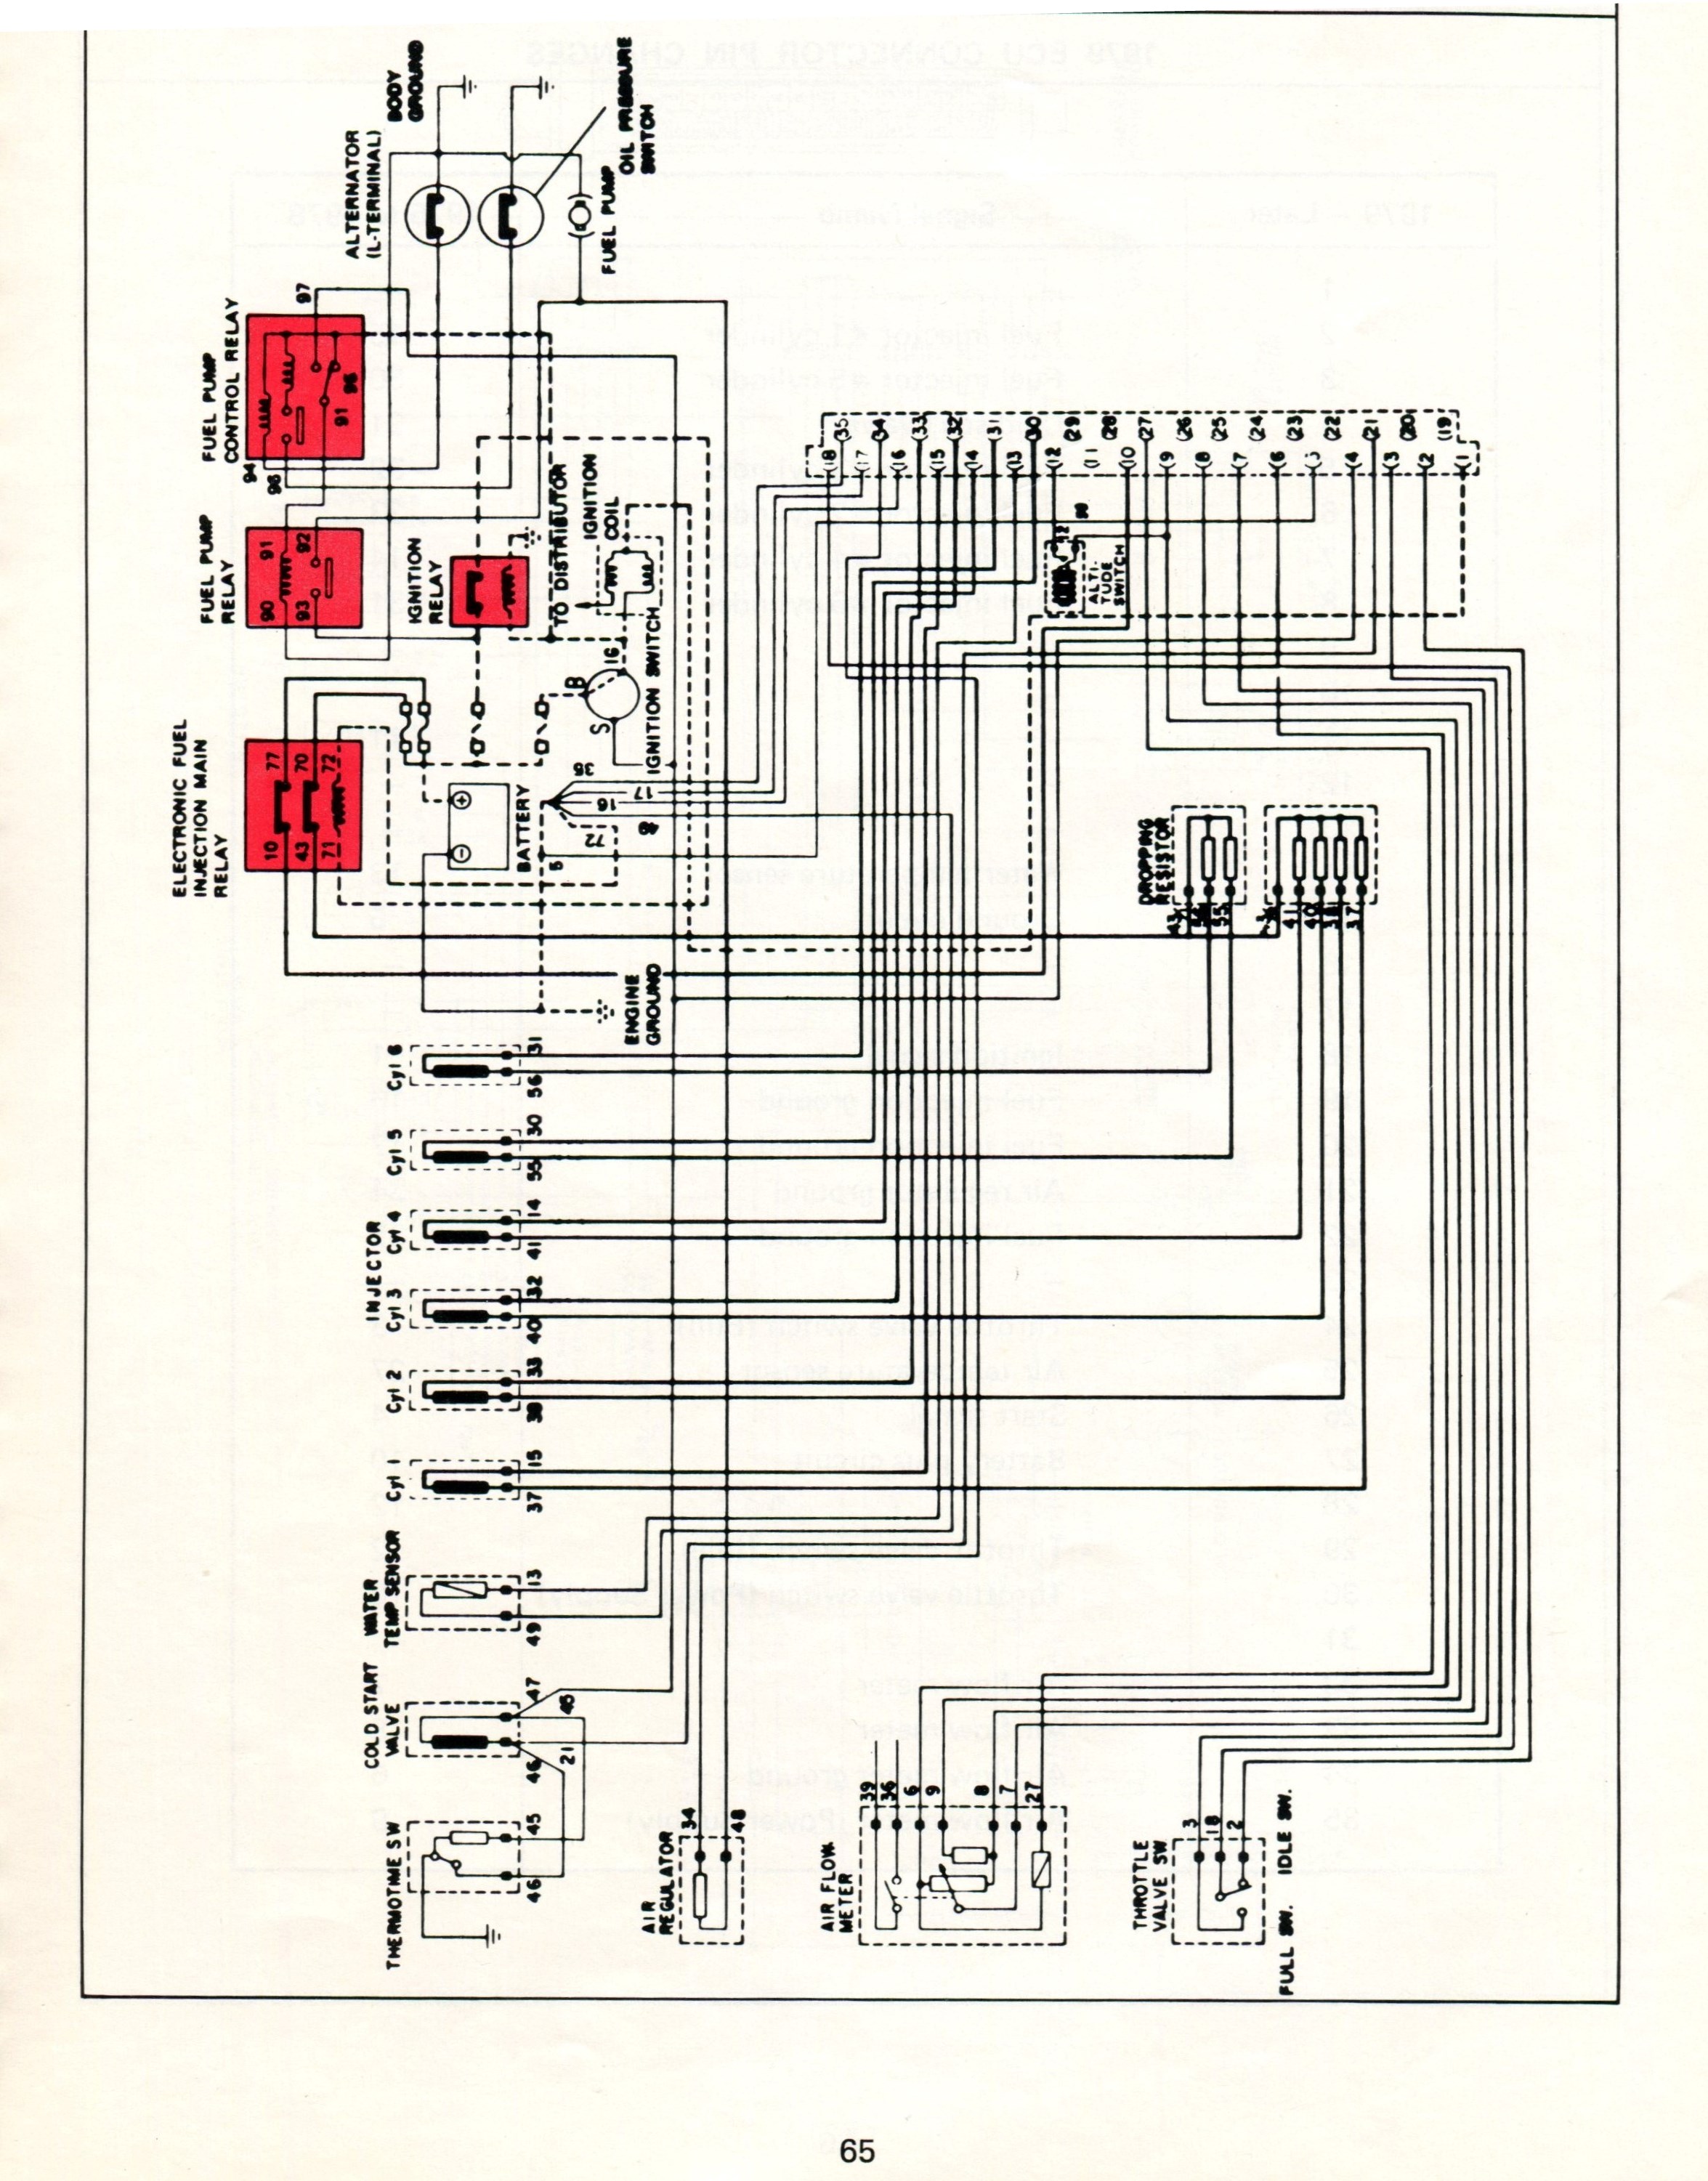 Datsun Electronic Fuel Injection - Wiring Diagrams 93 mx3 fuel injector wiring diagram 